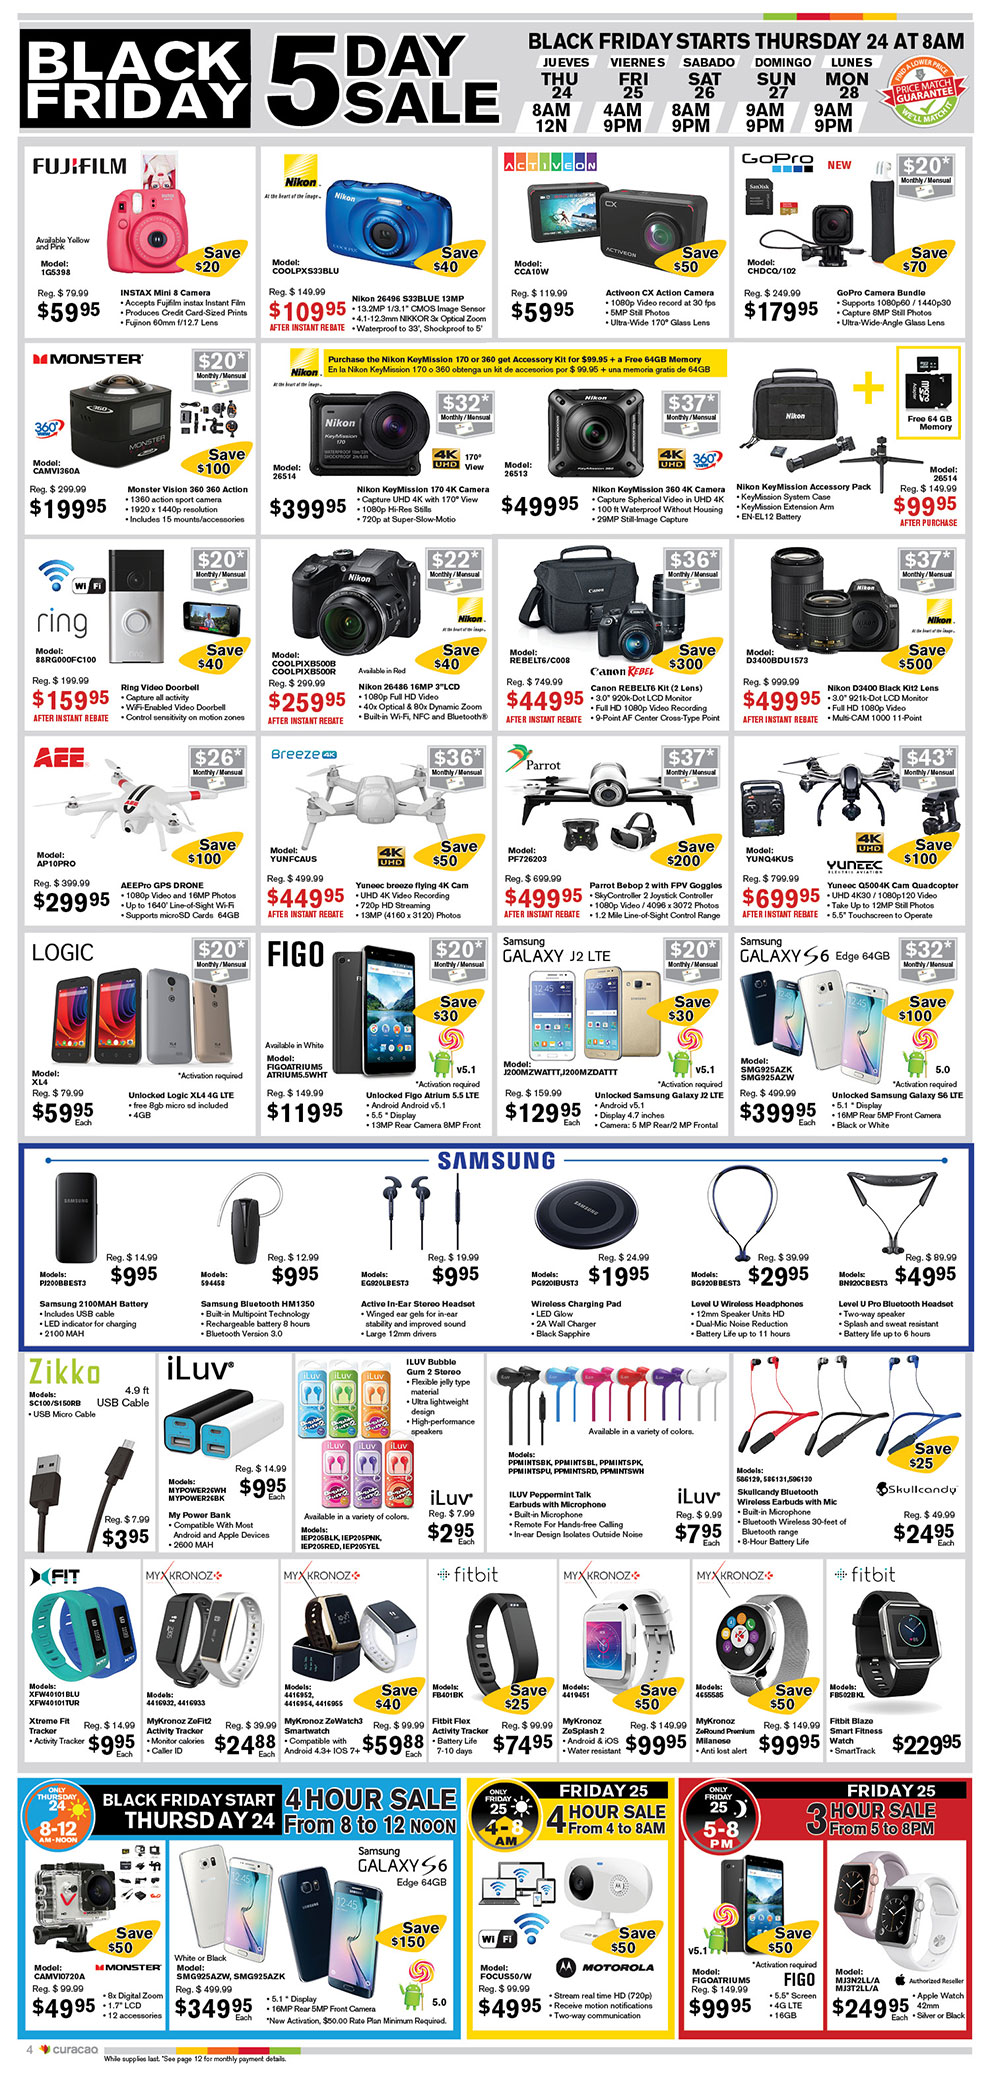 Curacao 2016 Black Friday Ad Page 4